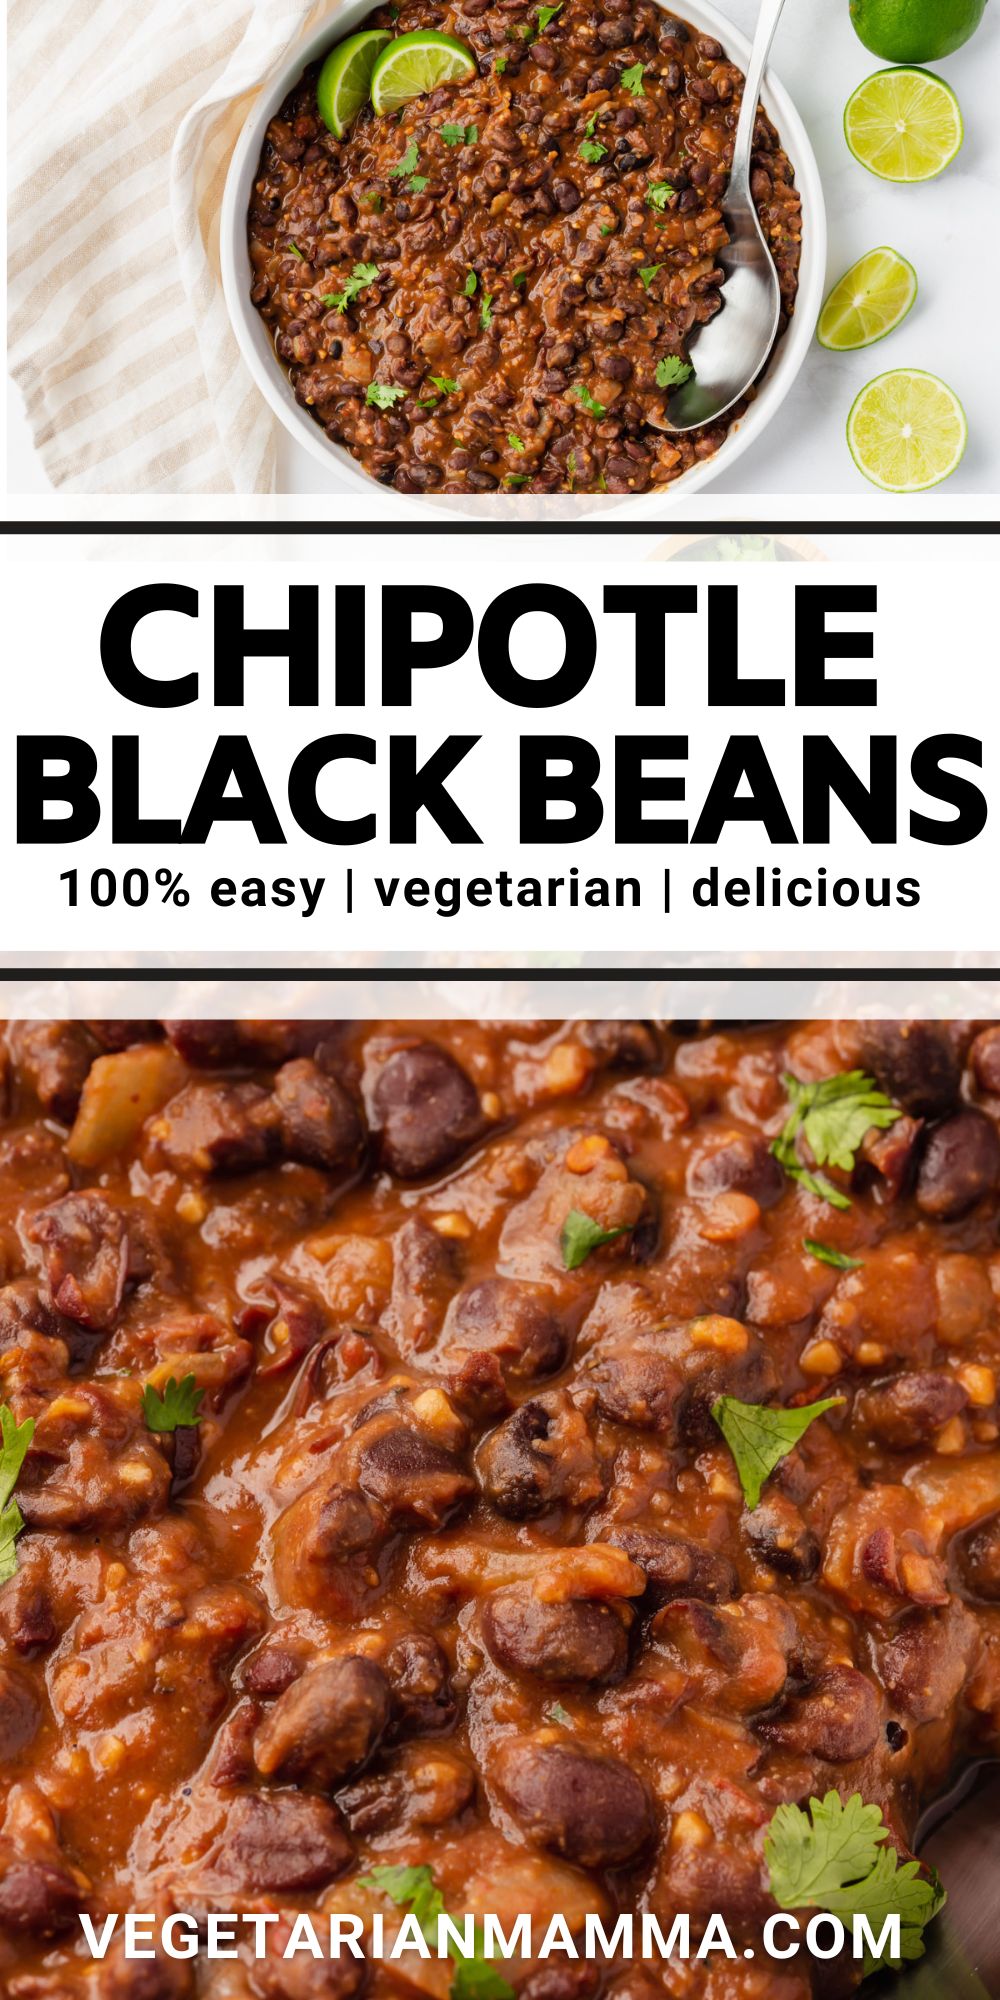 Seasoned Black Beans are a high-protein dish, perfect for making vegetarian tacos, burrito bowls, or eating with a spoon!